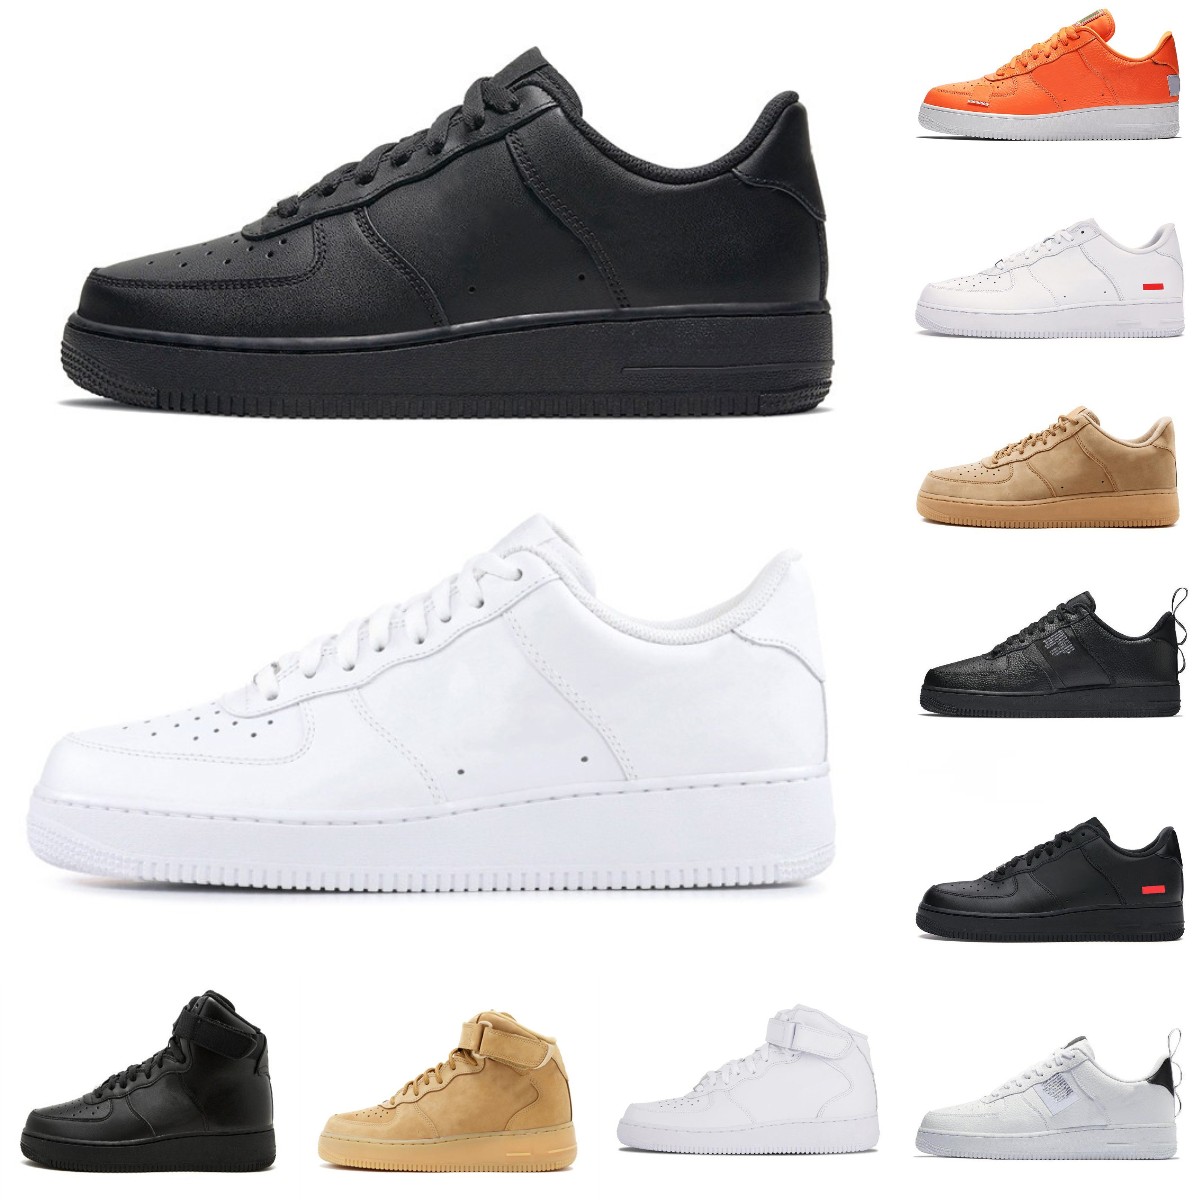 Skateboard Shoes Casaul Shoe low Sports Sneakers All White Black Wheat Running 022 Ers Outdoor Men Low Unisex Forces Classic AF 1 07 Knit Euro Airs High 36-46